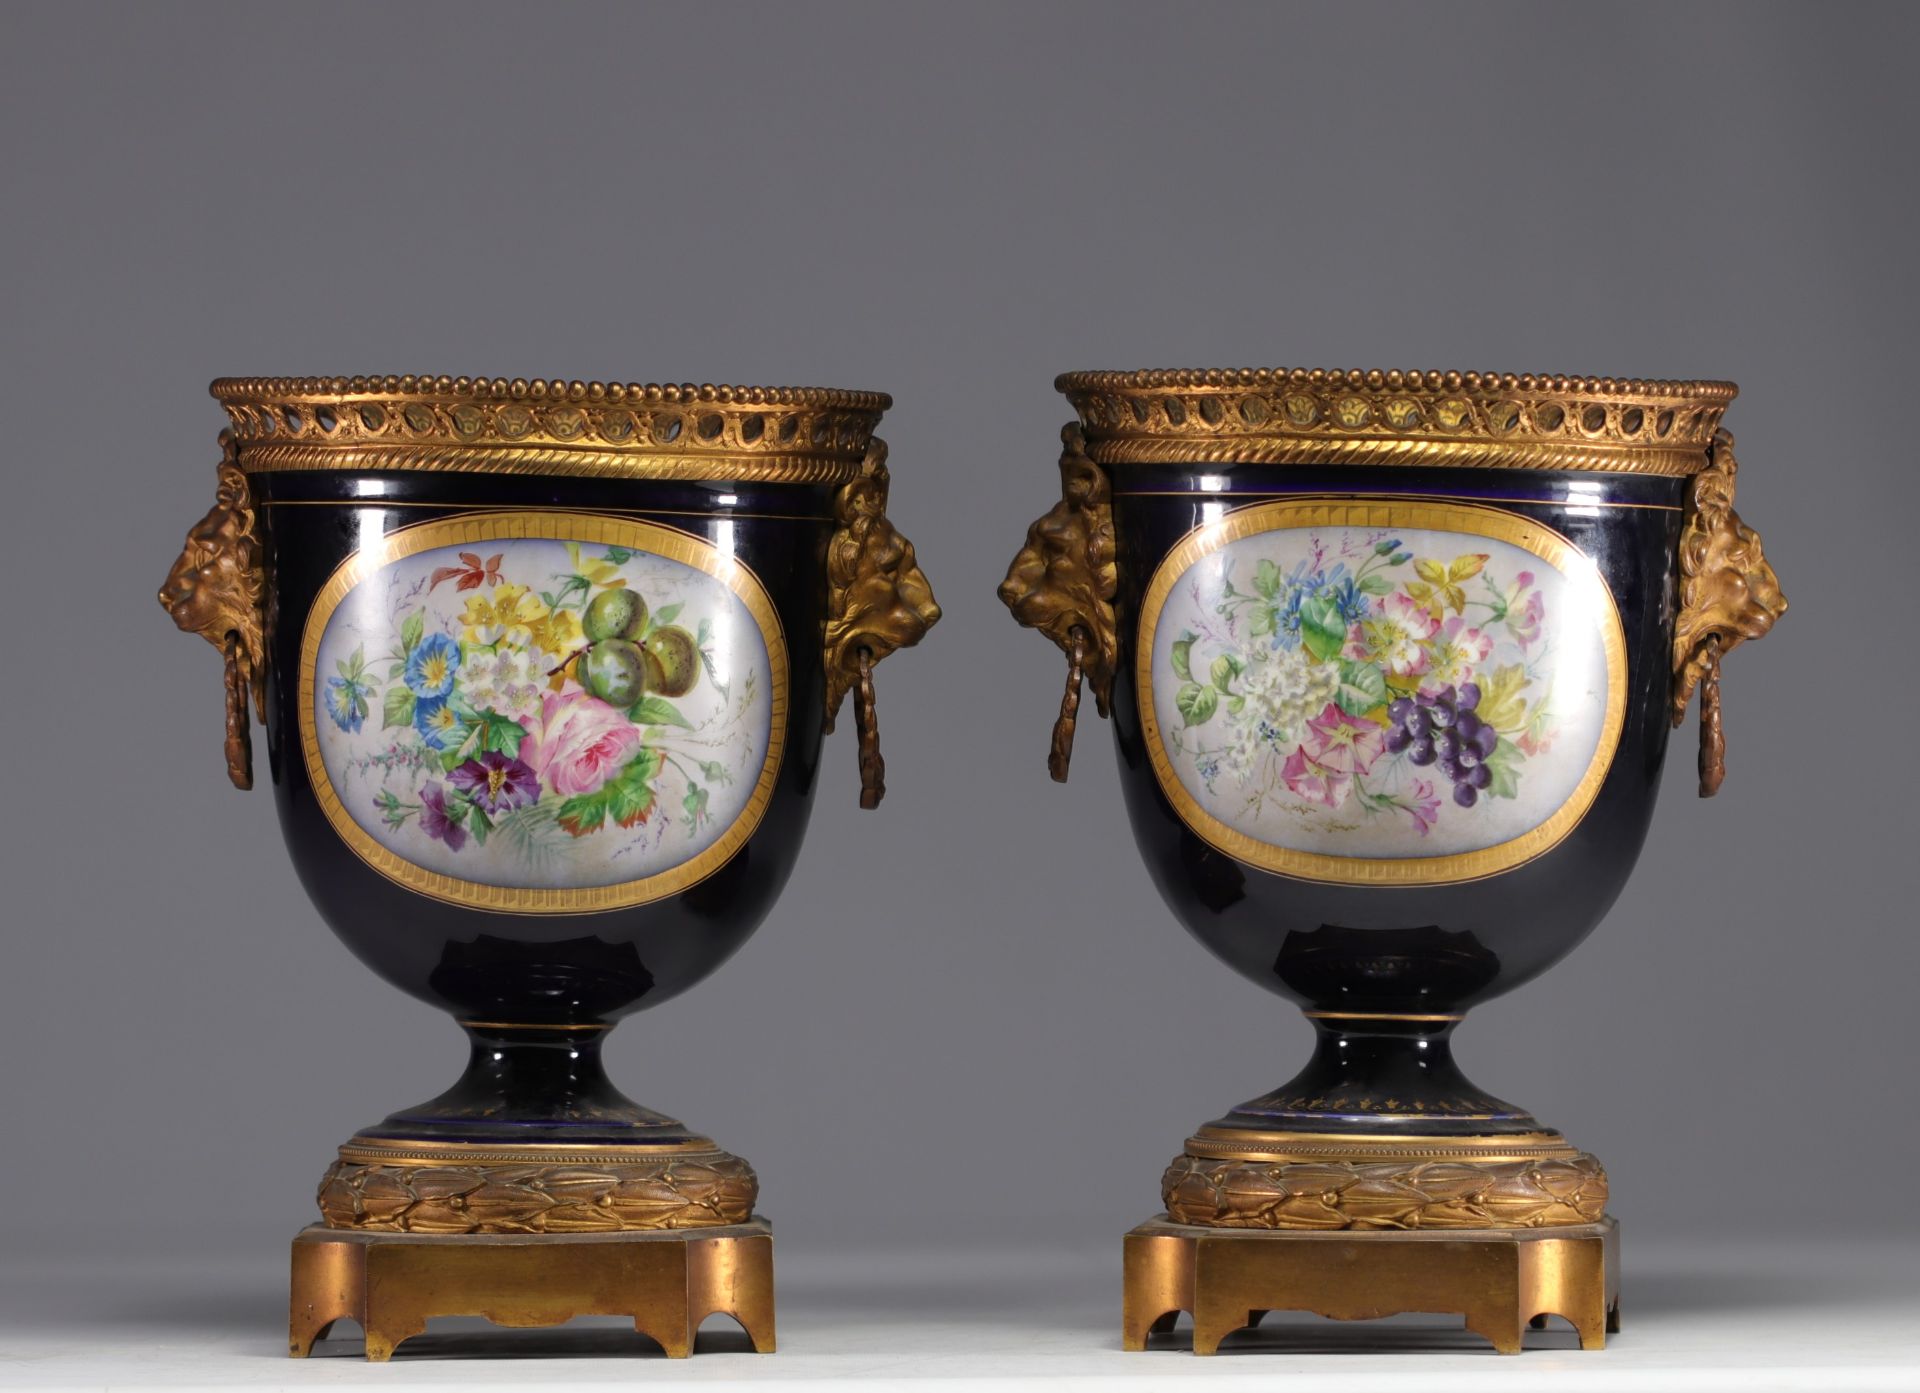 Pair of Sevres porcelain vases mounted on bronze, 19th century. - Image 3 of 4